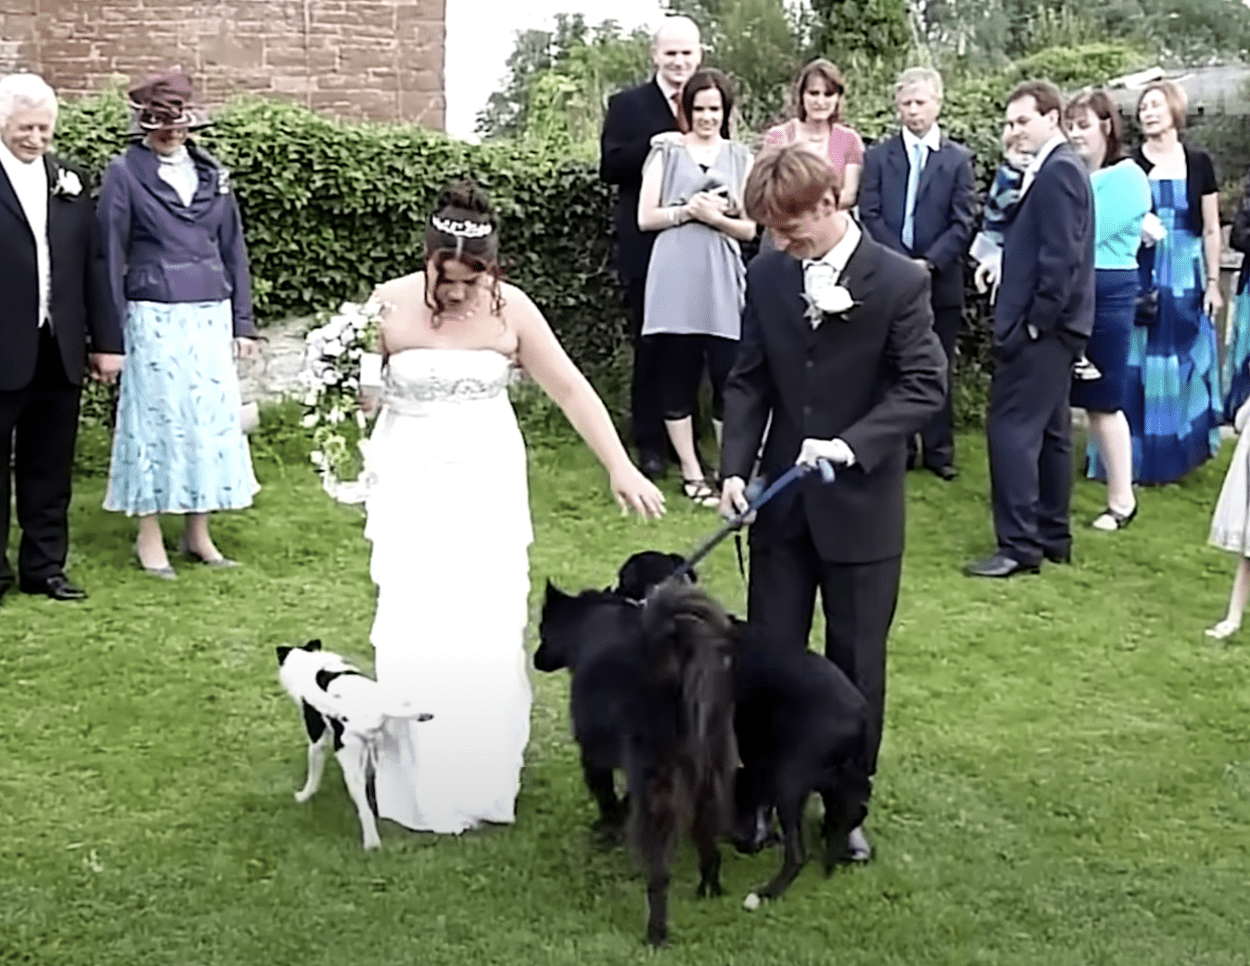 Dogs marks his territory on the bride's dress during their wedding ceremony. | Source: youtube.com/failarmy